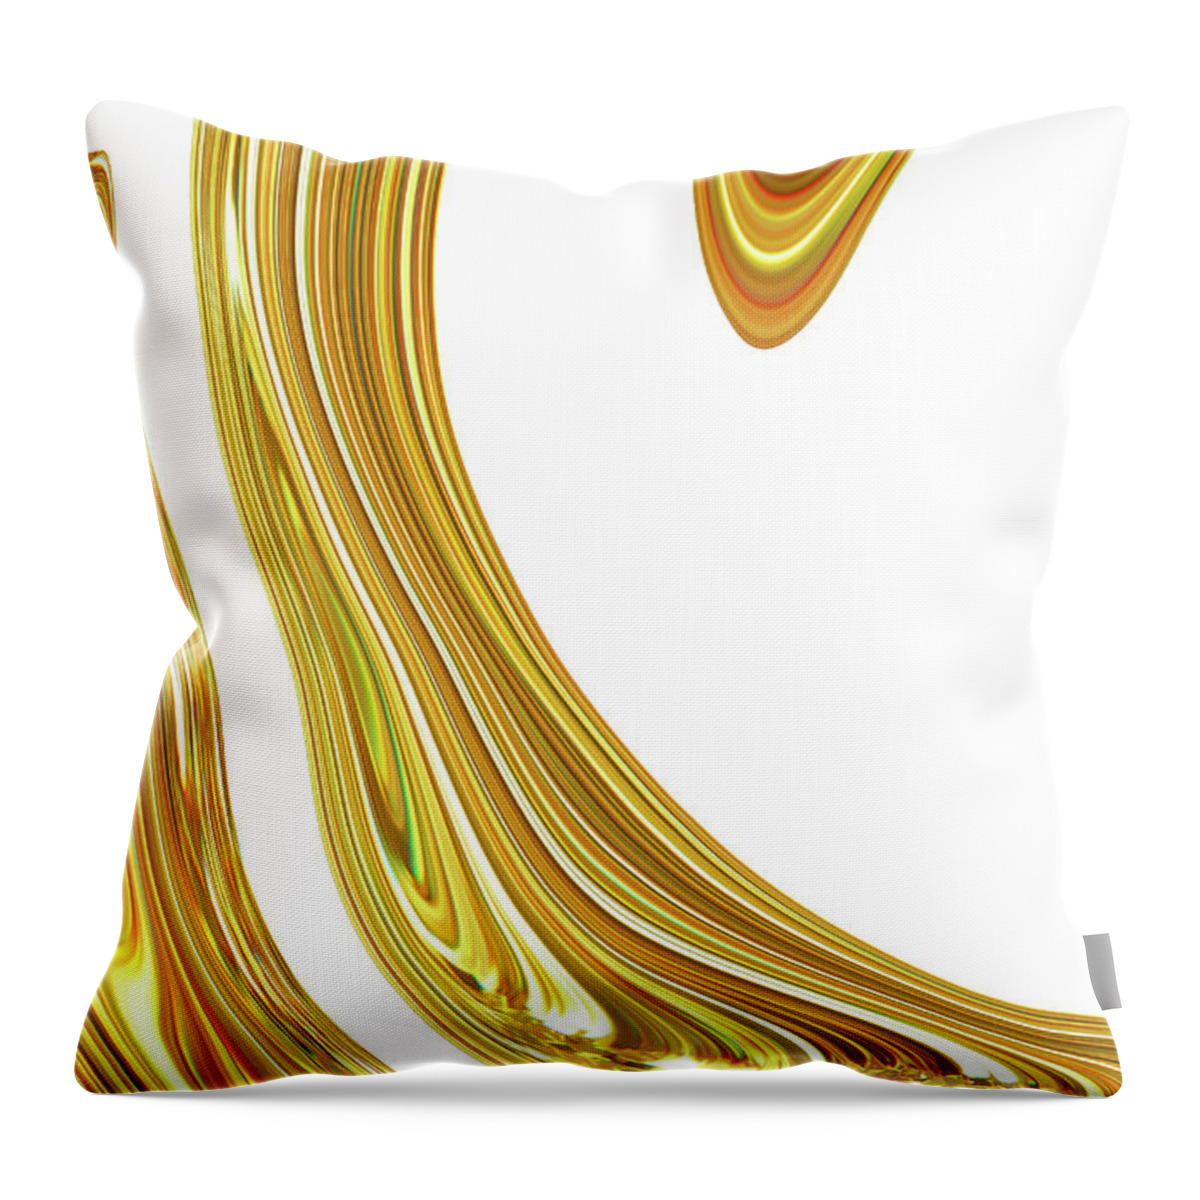 Abstract Throw Pillow featuring the photograph Abstract Of Flowing Movement by Severija Kirilovaite